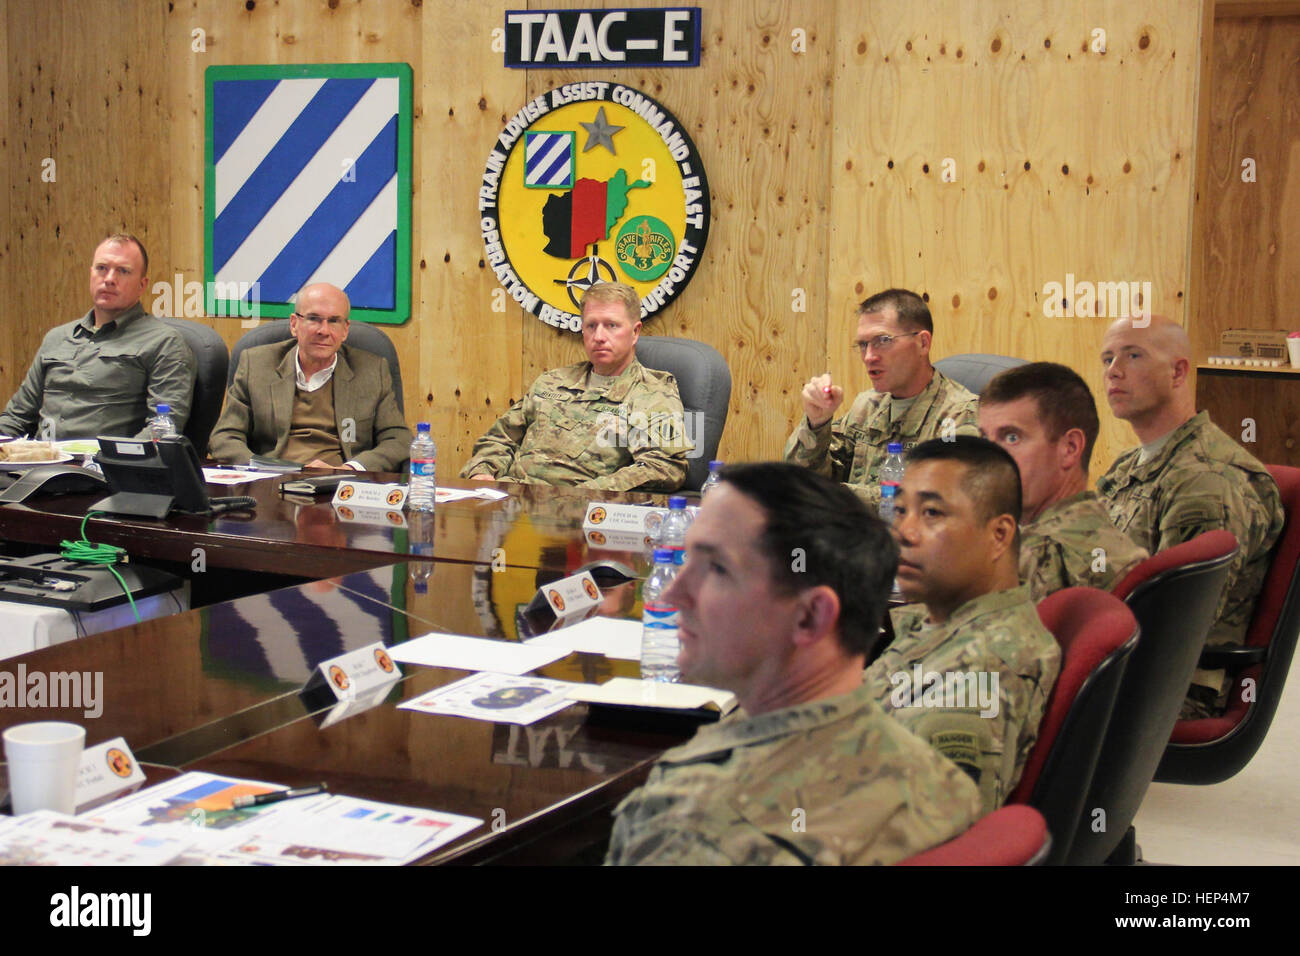 Col. Cameron Cantlon (center right), the Train, Advise, Assist Command – East Deputy Commanding Officer uses a laser pointer to highlight locations on a map of eastern Afghanistan to U.S. Ambassador to Afghanistan P. Michael McKinley (center left) during a meeting with TAAC-E leaders and staff at Tactical Base Gamberi Feb. 11, 2015. McKinley visited TAAC-E to gain an assessment of the transition from Operation Enduring Freedom to NATO’s new Resolute Support Mission and discuss progress of Afghan National Security Forces in eastern Afghanistan. (U.S. Army photo by Capt. Jarrod Morris, TAAC-E Pu Stock Photo